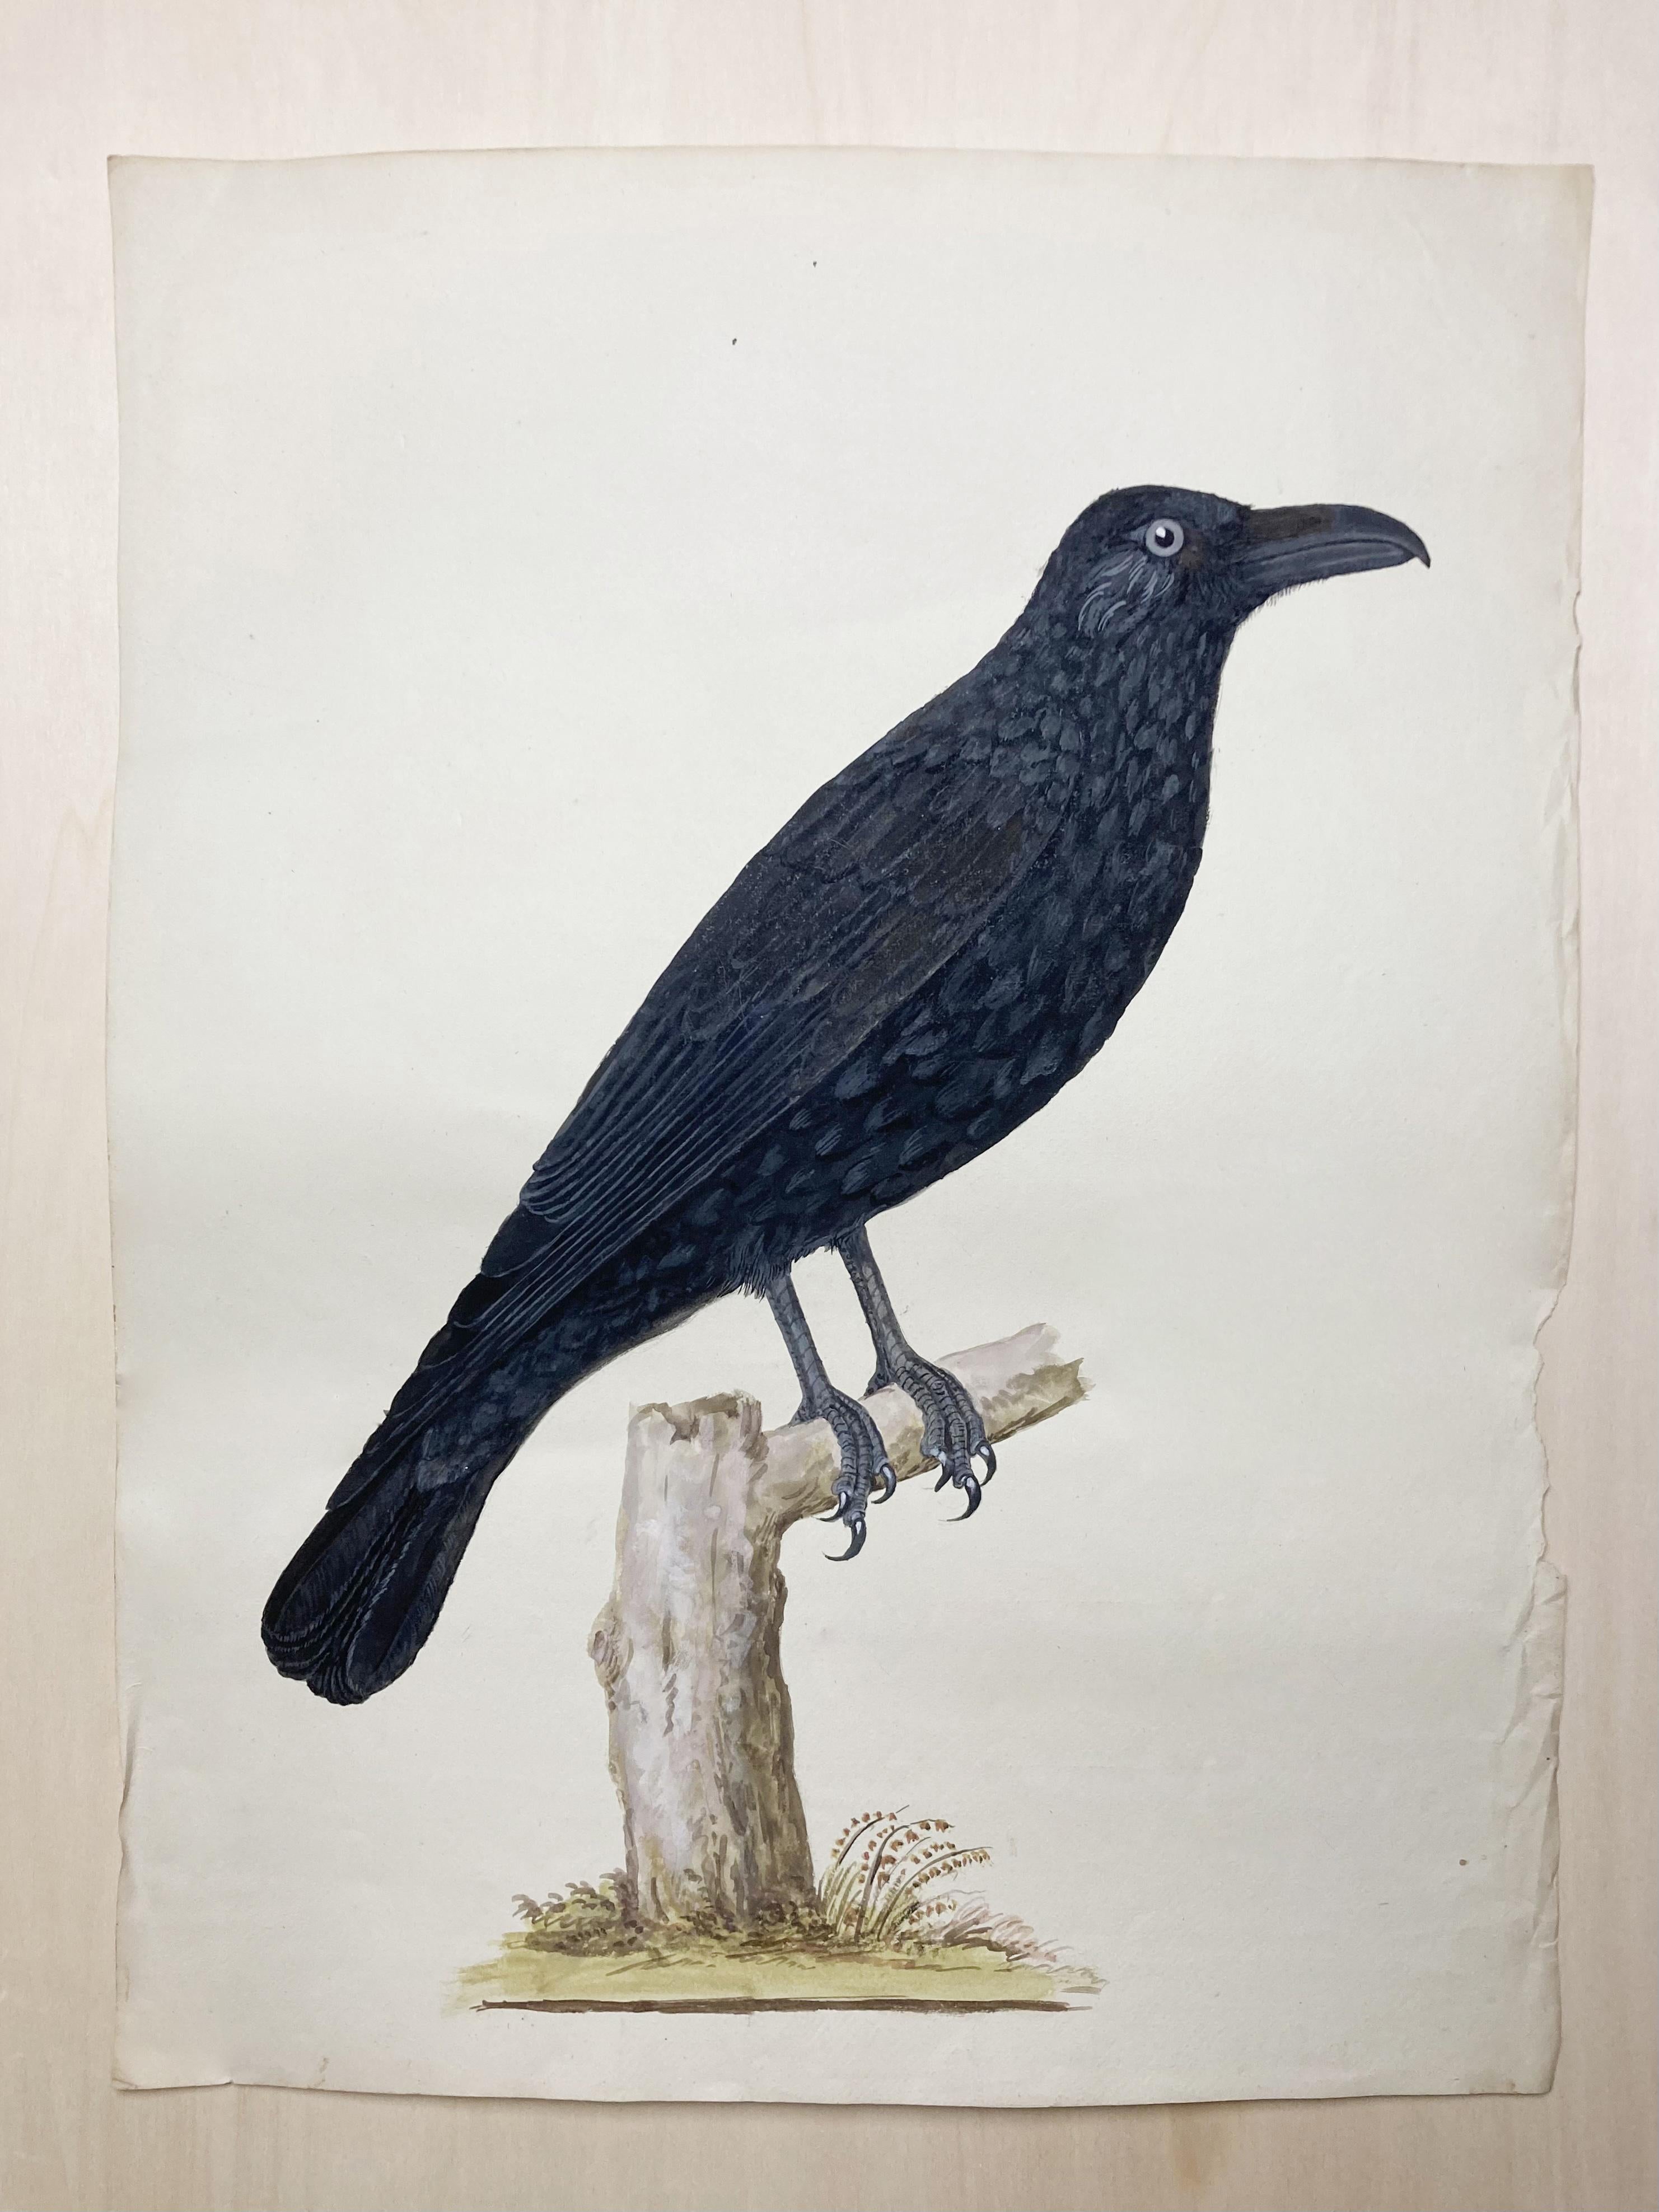 Peter Paillou Animal Art - Animal drawing of sitting crow in black by enlightened british painter